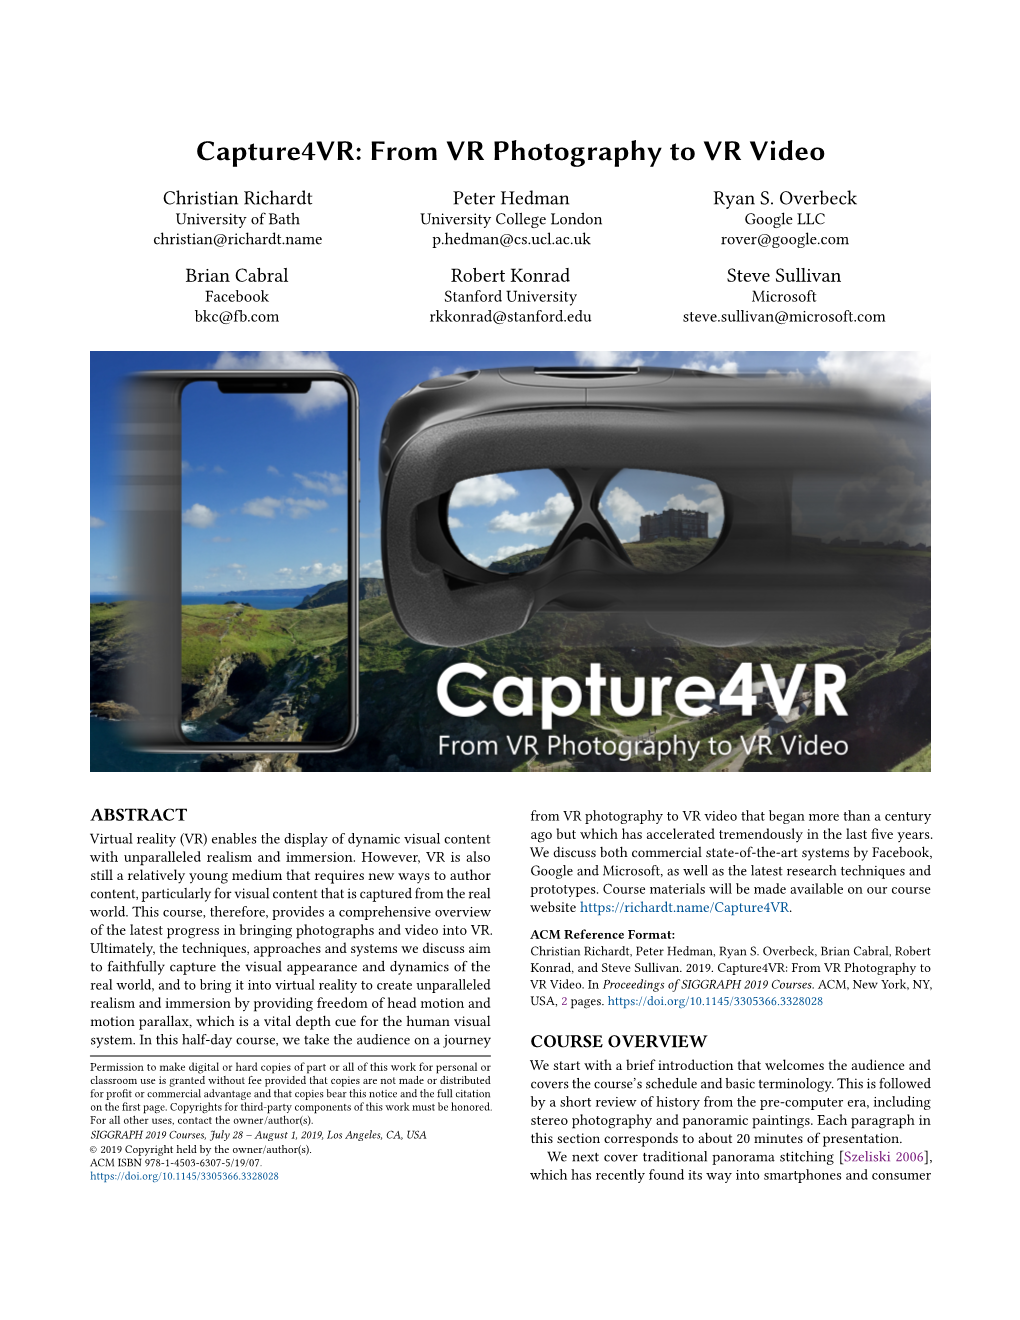 Capture4vr: from VR Photography to VR Video